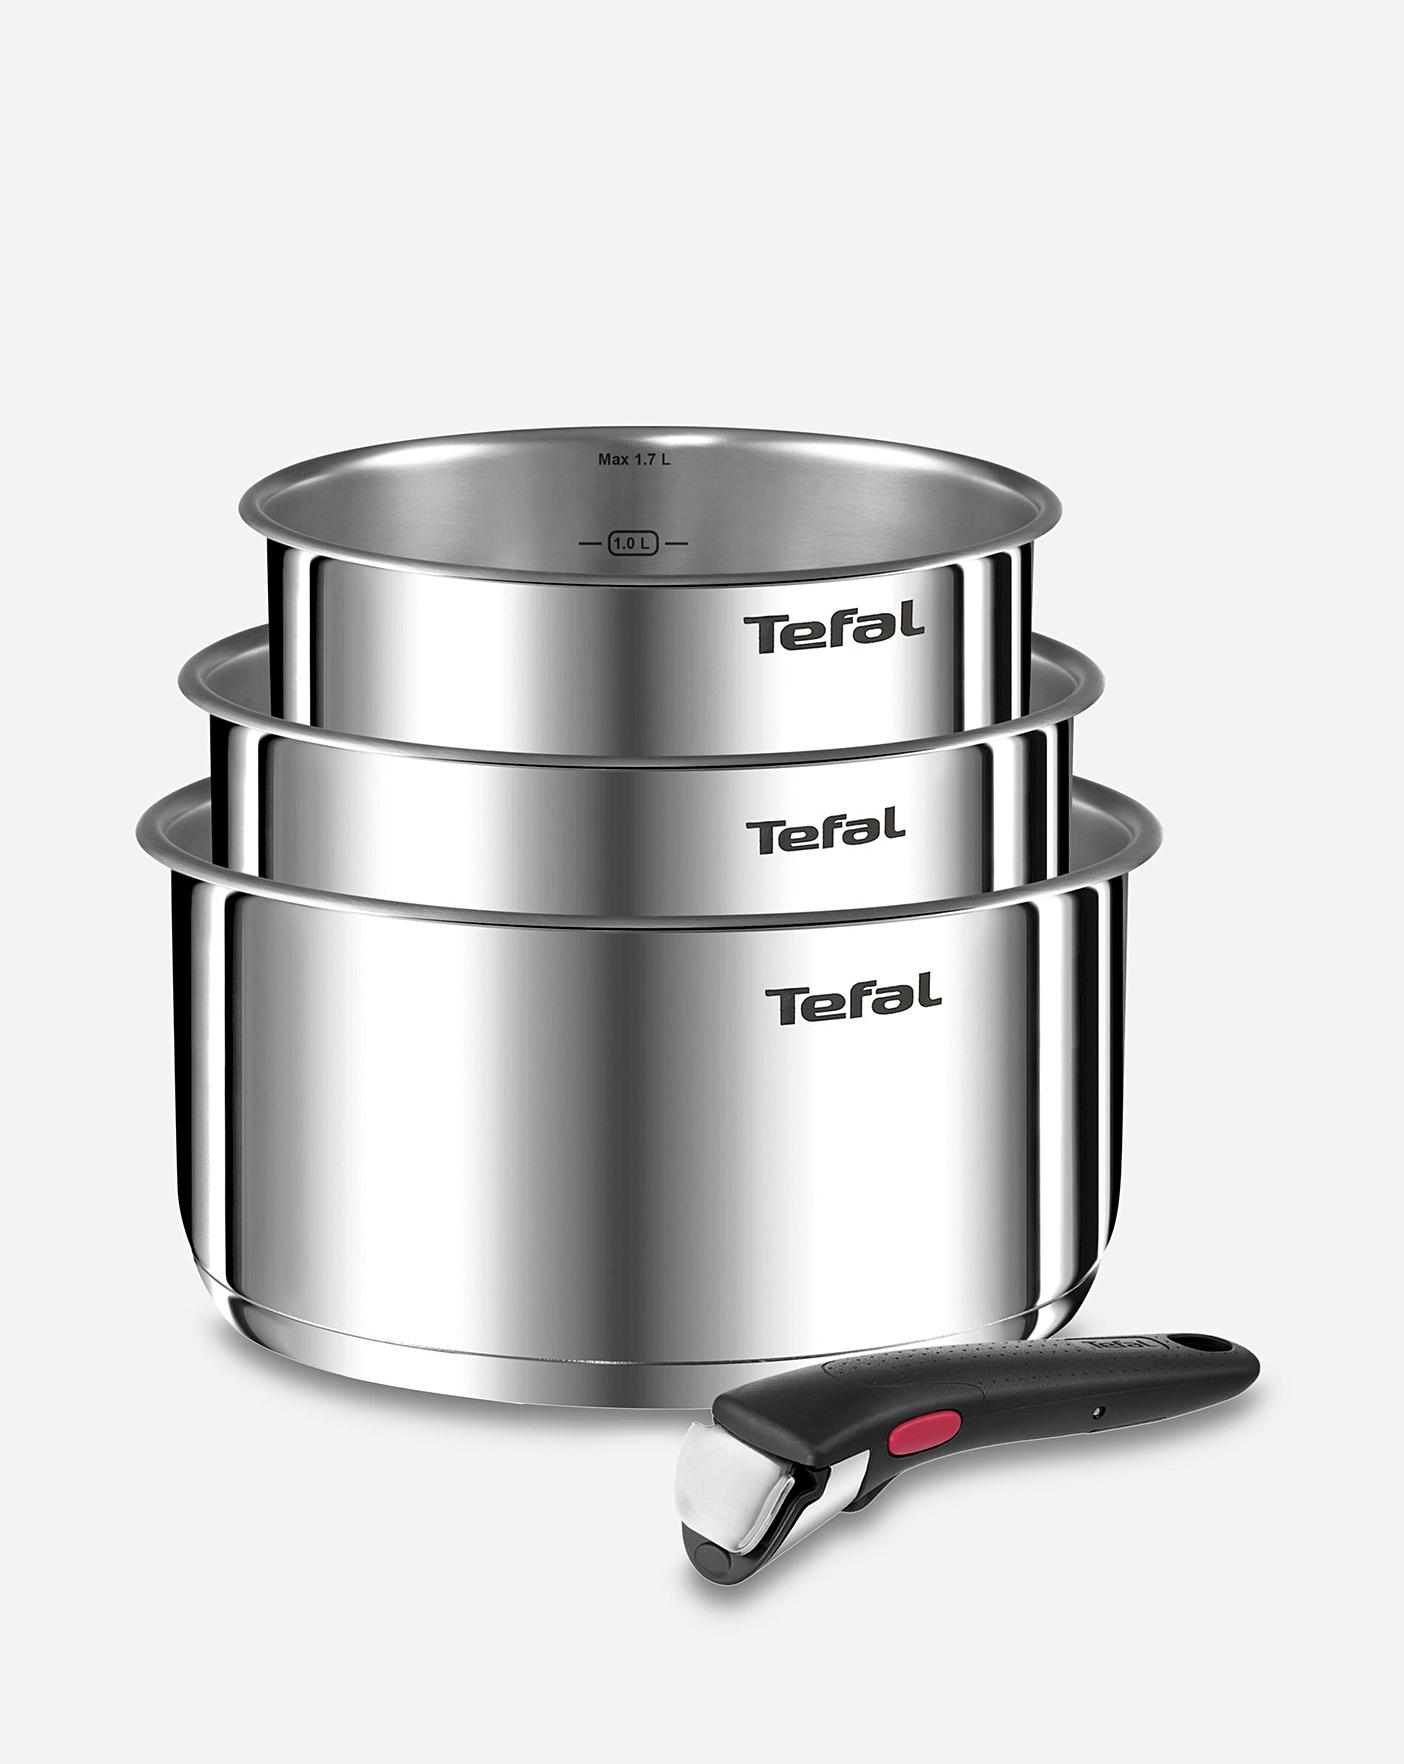 Tefal, Ingenio Removable Handle Cookware